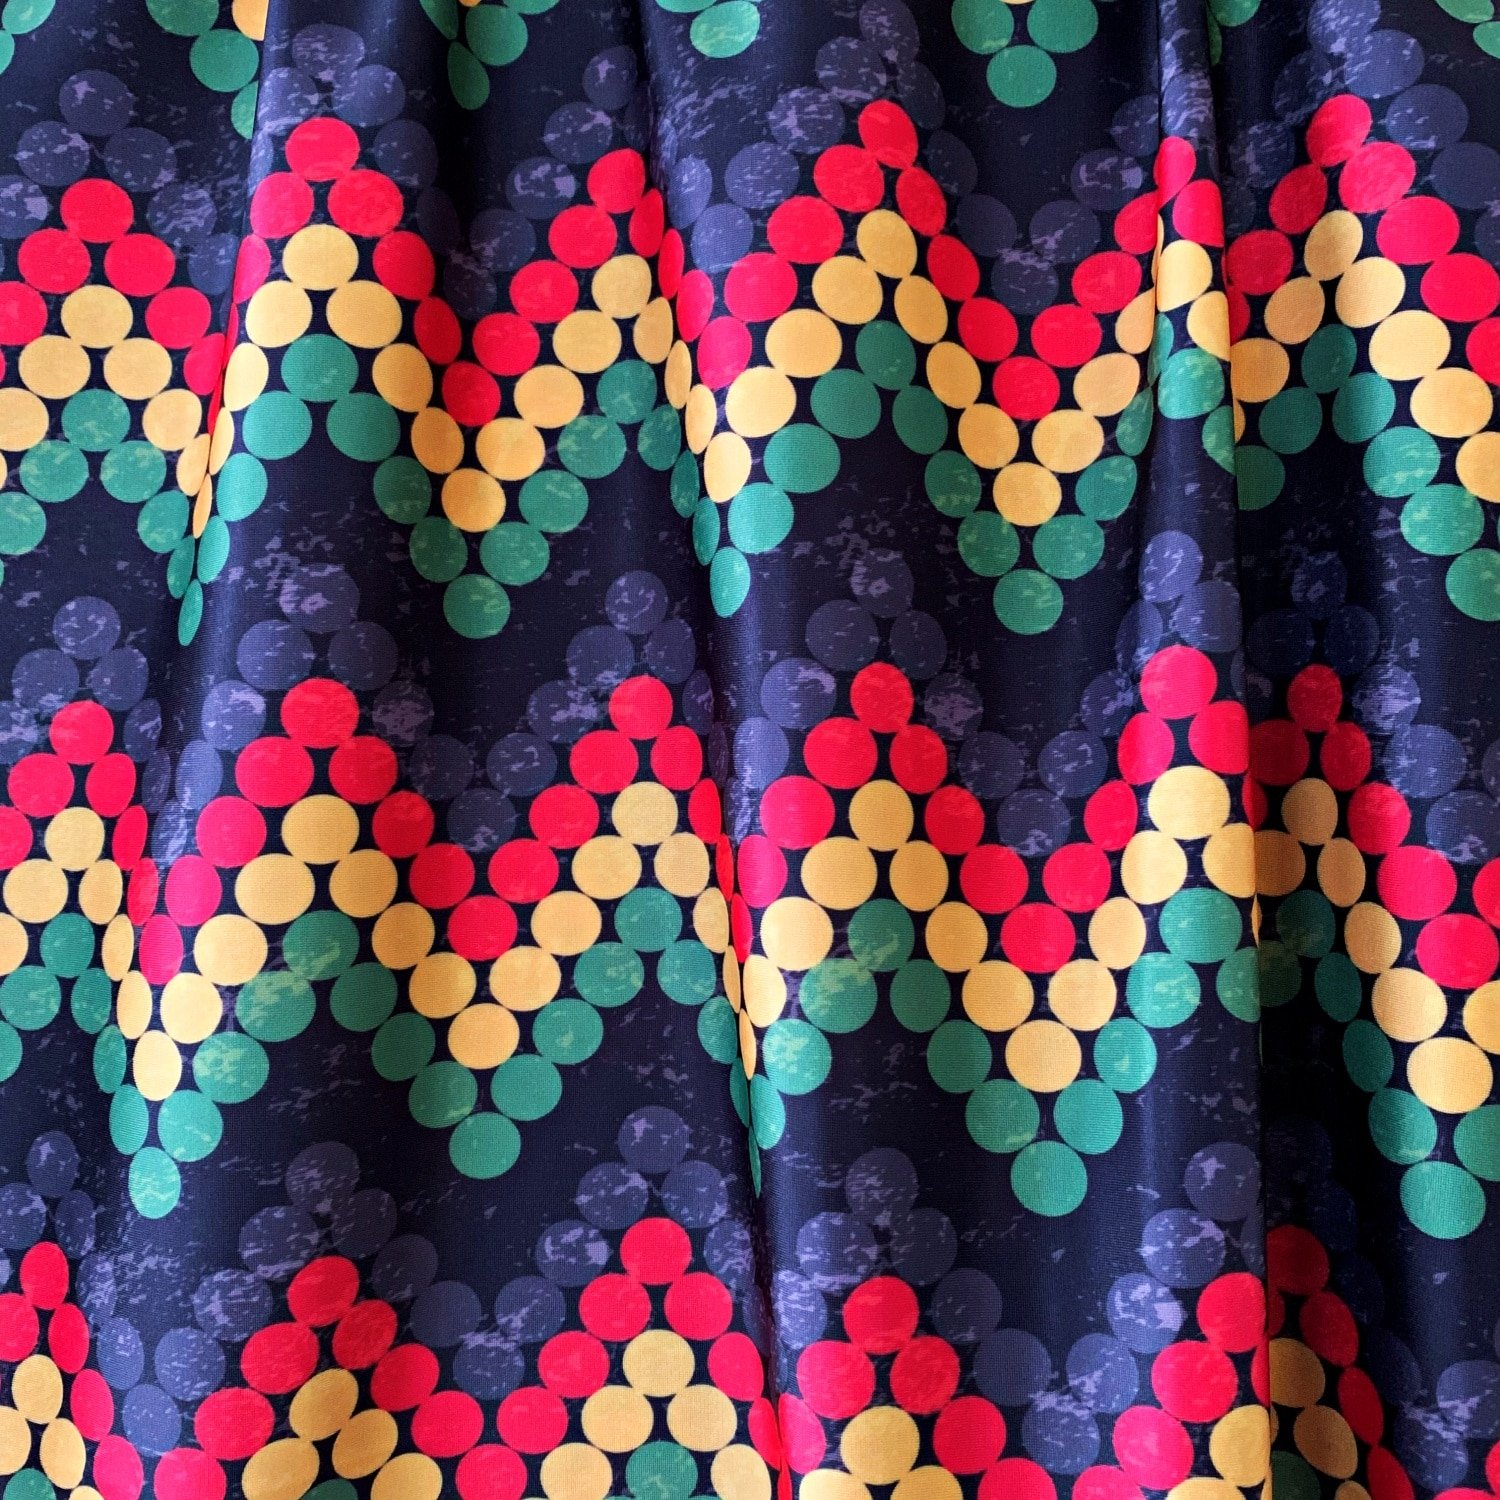 Rasta Print Fabric featuring red, yellow, green, grey and black dots in a zig zag repeating pattern